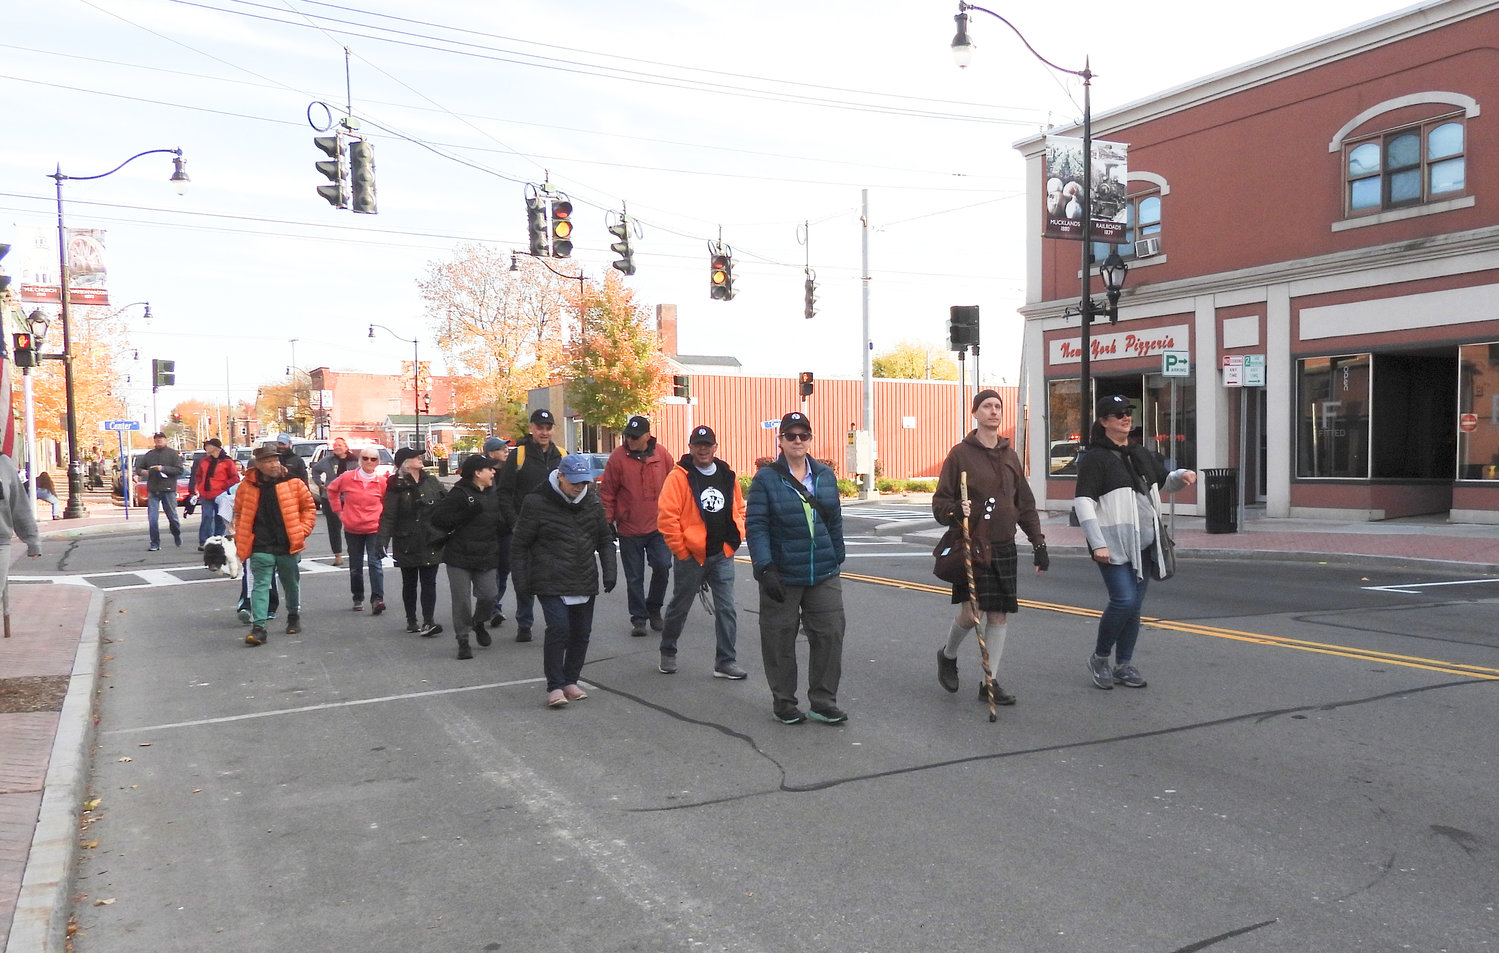 People tread the same path black and white abolitionists did in 1835 on Sunday as they start in Canastota and walk five miles as part of the National Abolition Hall of Fame and Museum's Abolitionist Freedom Walk.